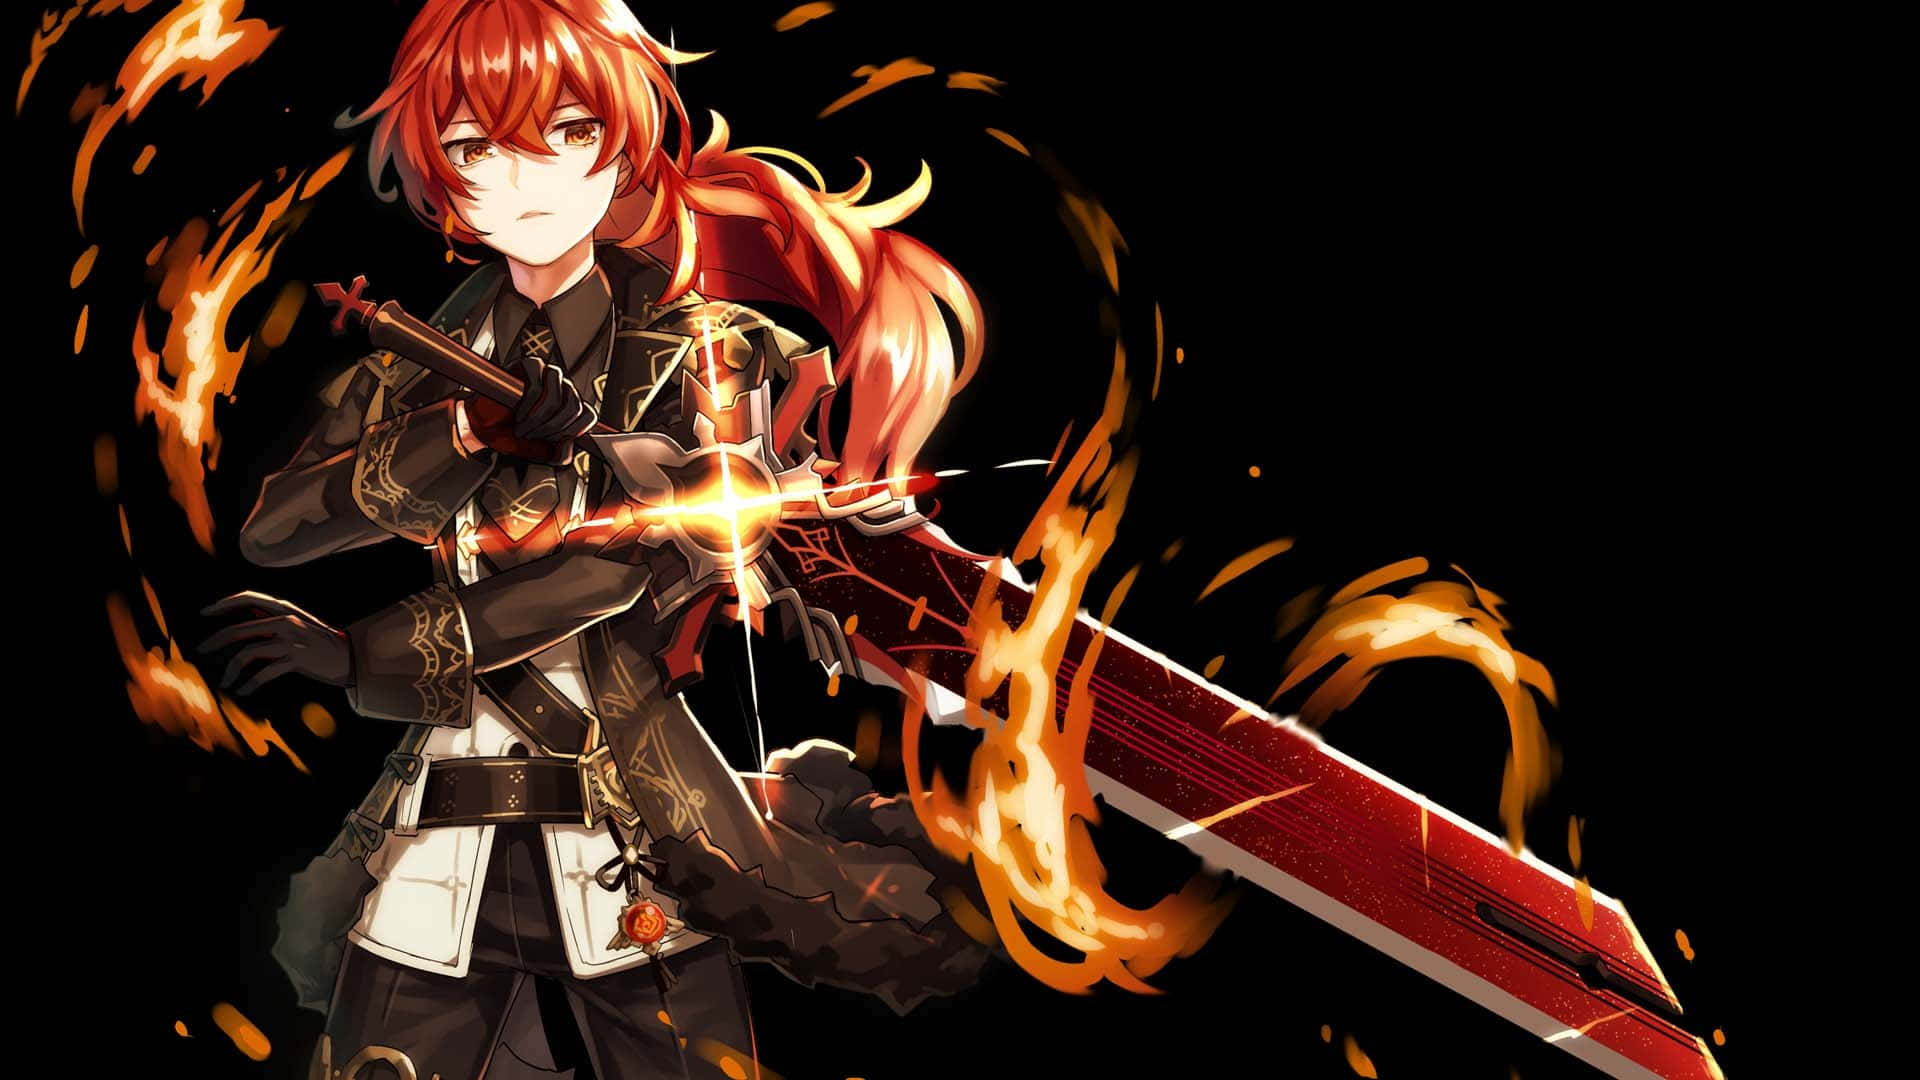 A Girl Holding A Sword In Flames Wallpaper